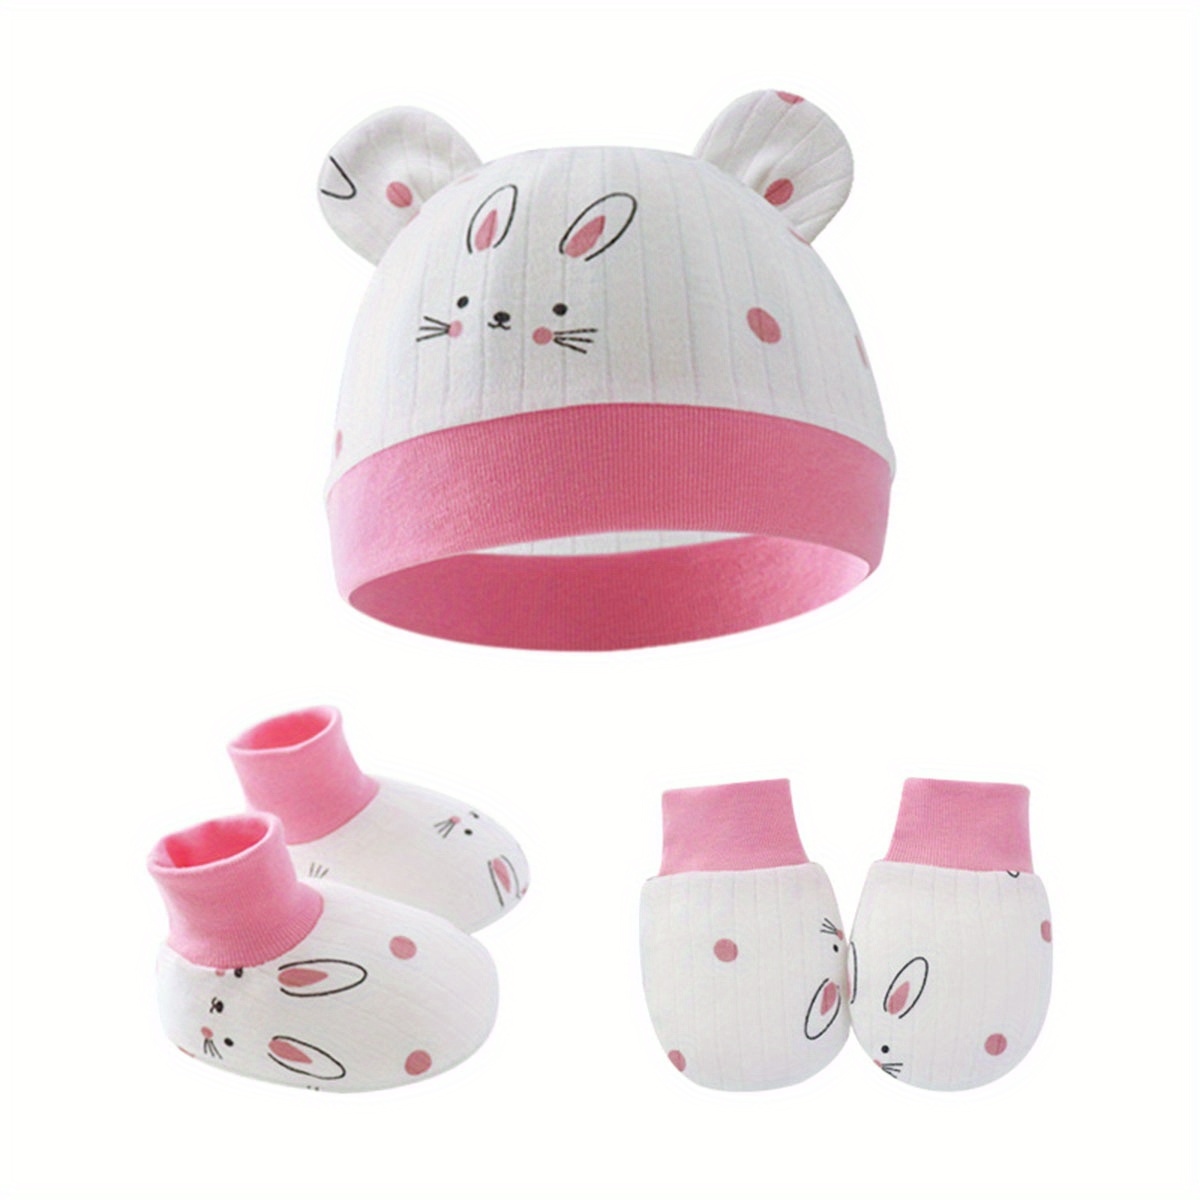 3pcs baby girls cute cartoon breathable soft hat socks gloves set hair accessories for gift details 3